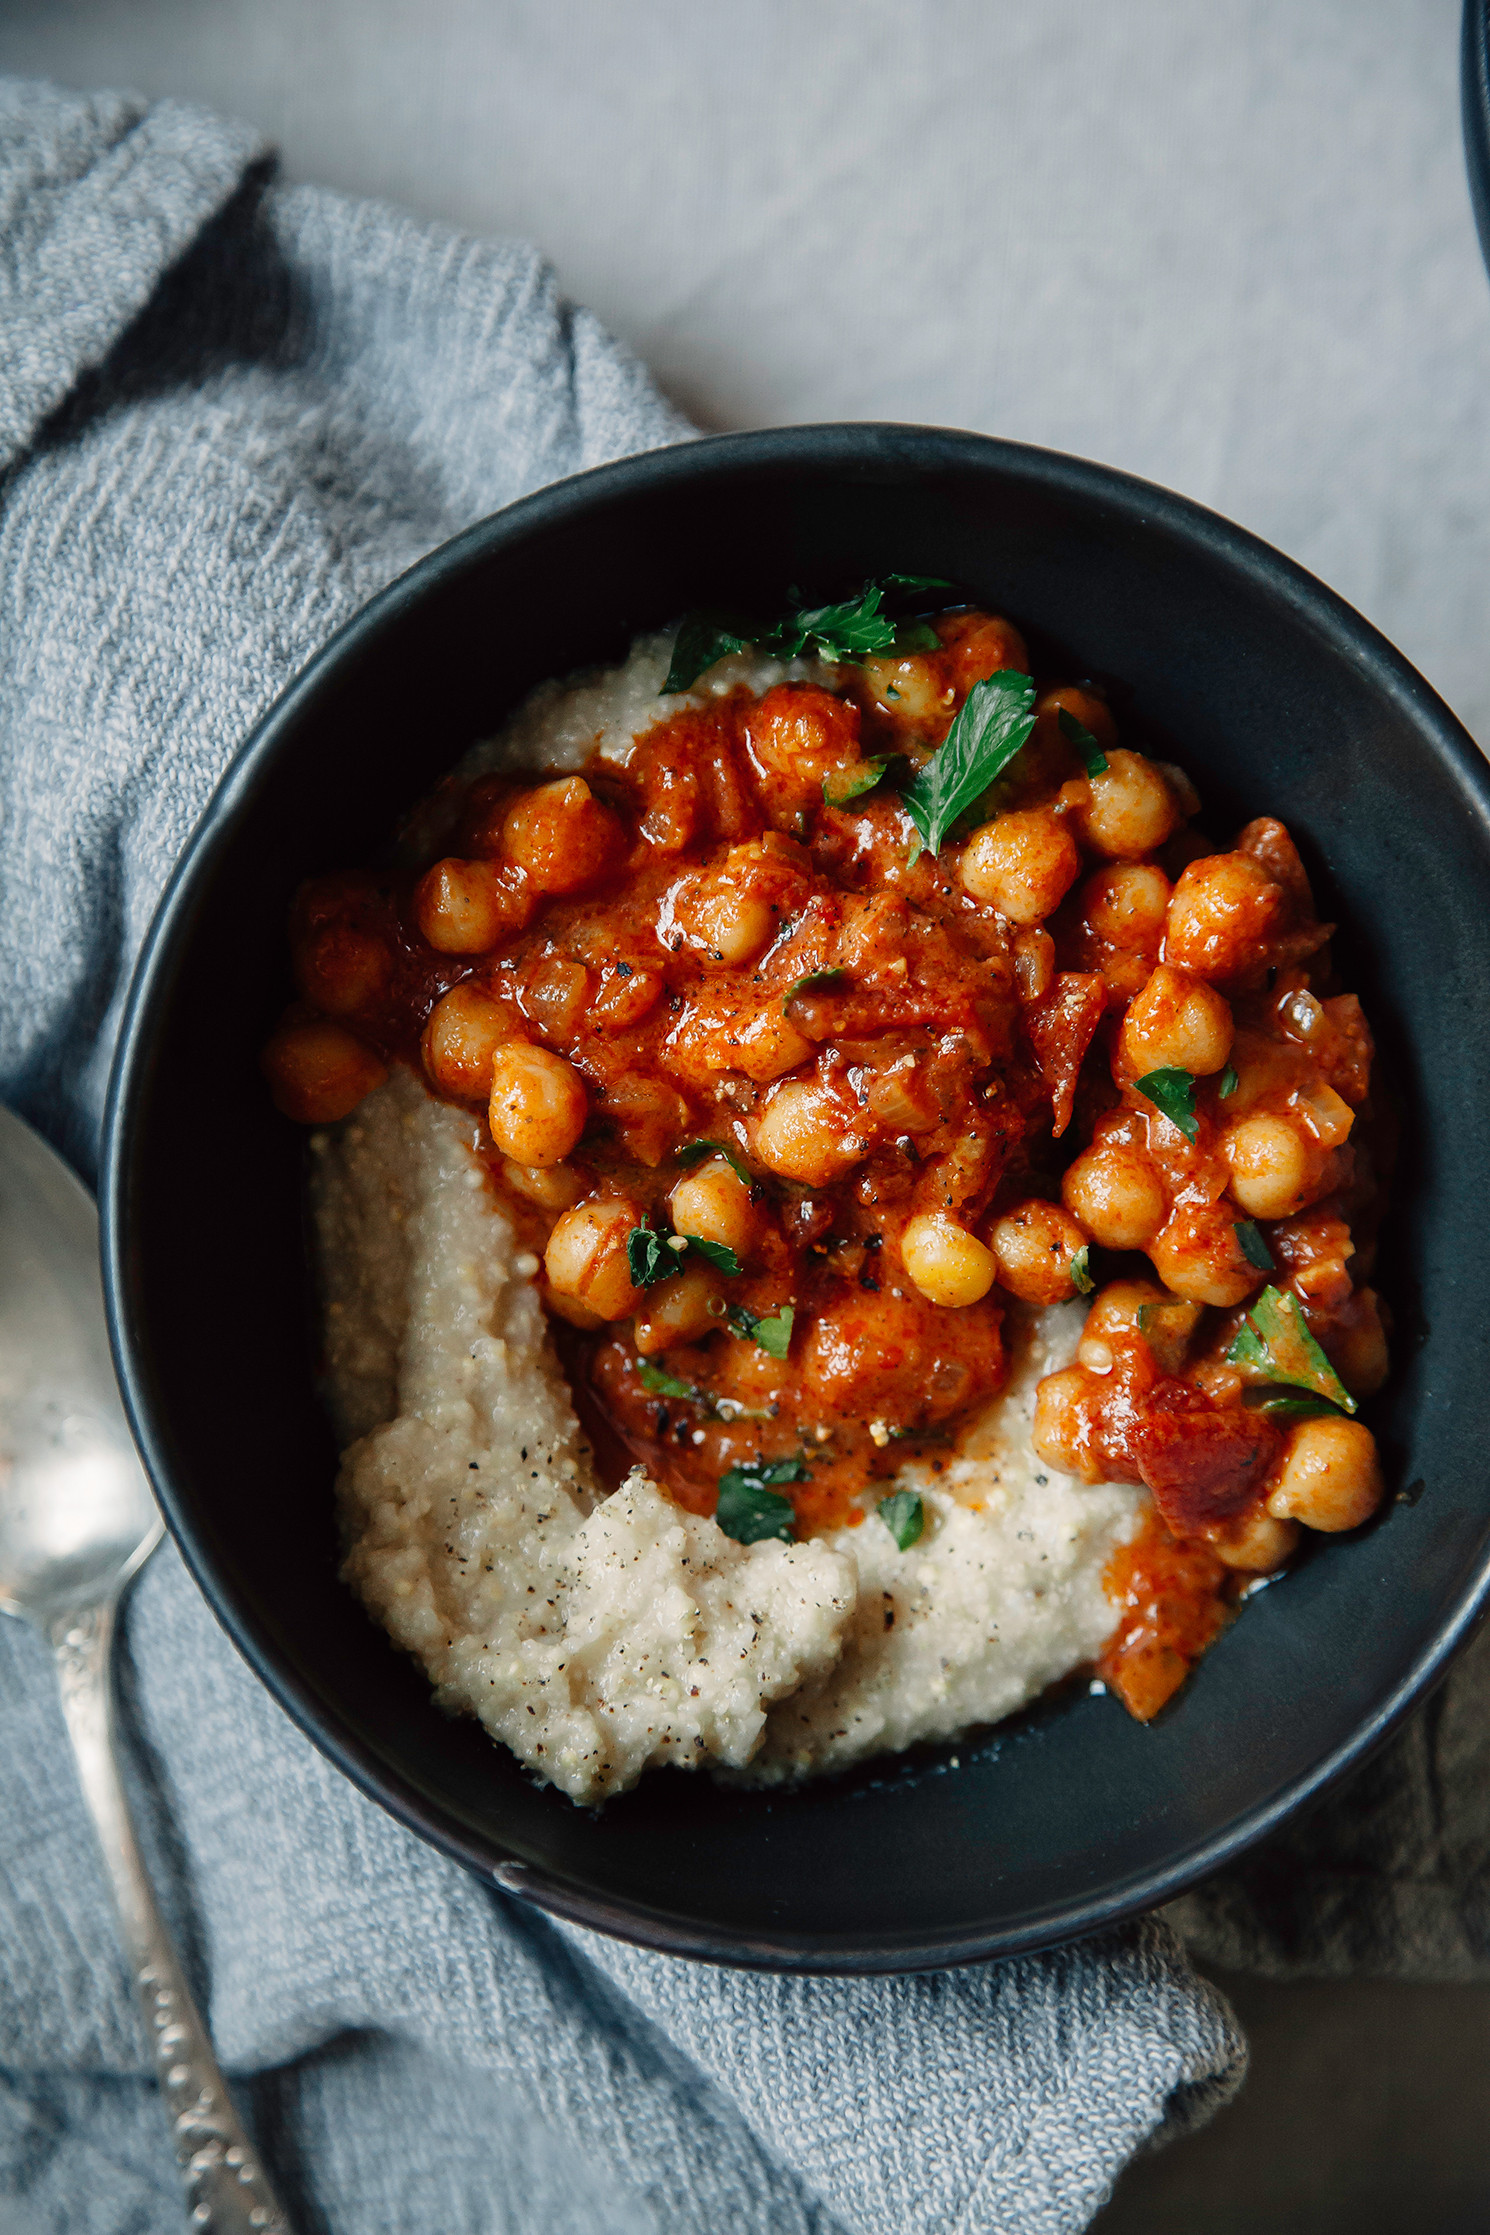 Chick Pea Vegetarian Recipes
 EVERYDAY EATS SEVEN SPICE CHICKPEA STEW WITH TOMATOES